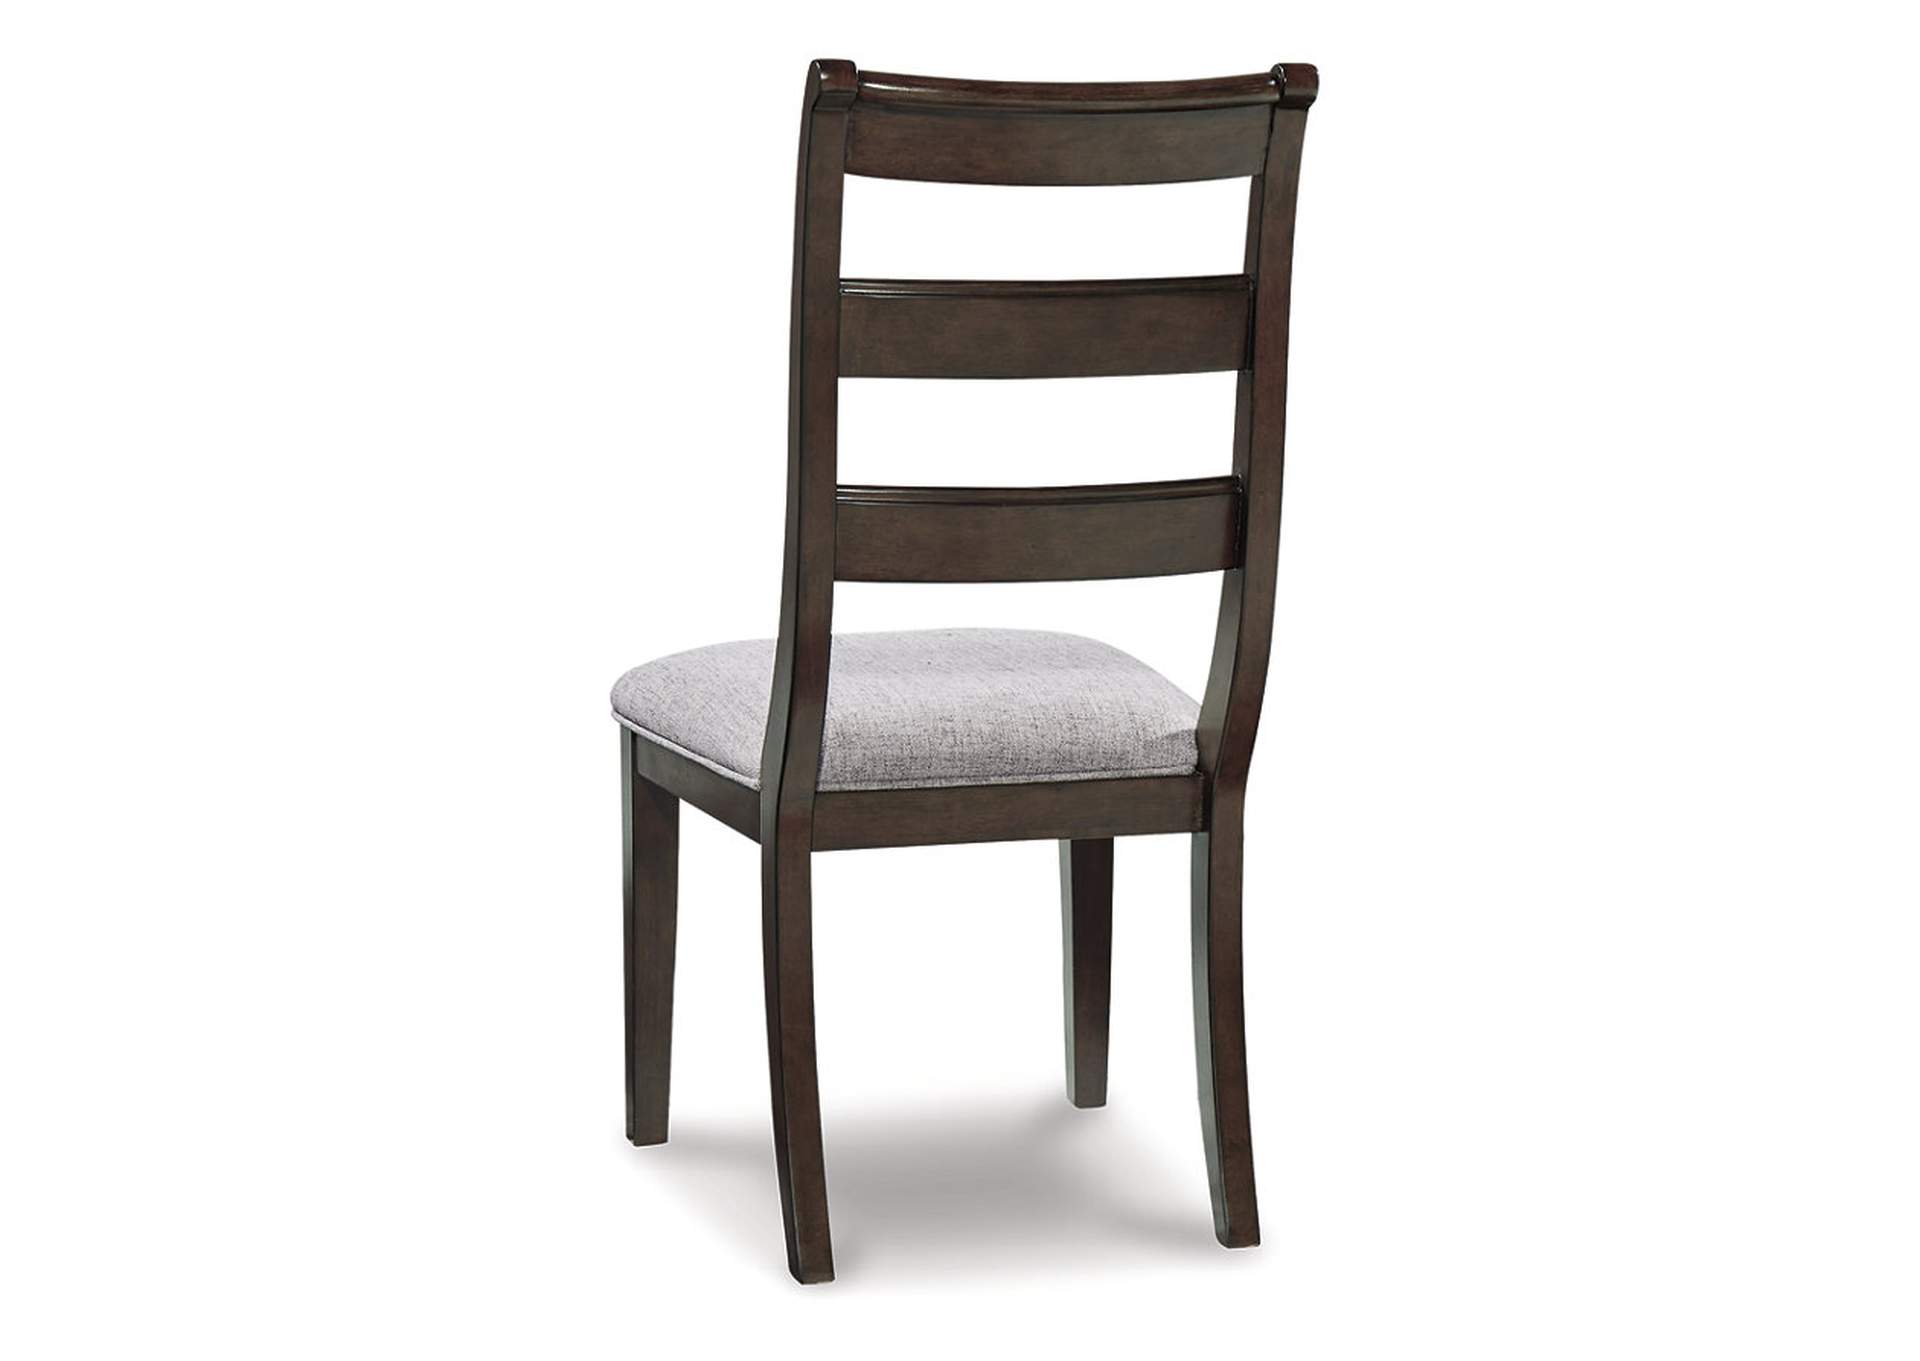 Adinton Dining Chair (Set of 2),Signature Design By Ashley